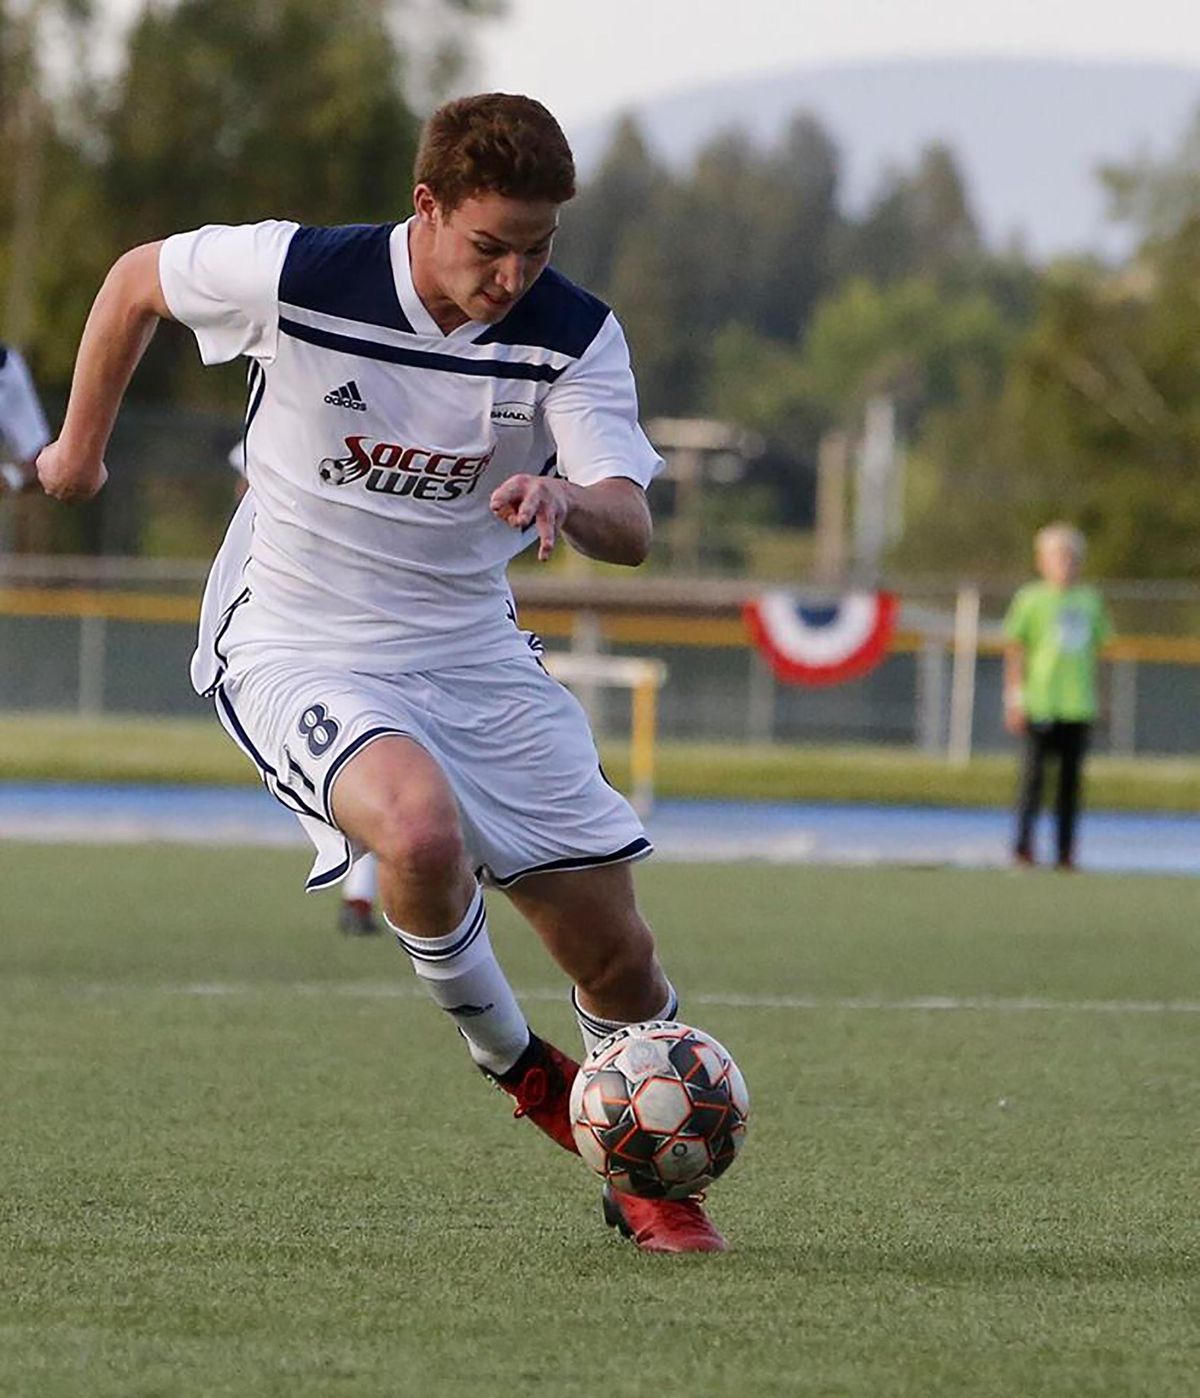 Spokane Shadow’s Jake Levine dribbles during a June 9 game against Kitsap Pumas at Spokane Falls Community College. The Shadow open the National Premier Soccer League playoffs Saturday against FCM Portland at Spokane Falls Community College. (Erik Smith / Courtesy)